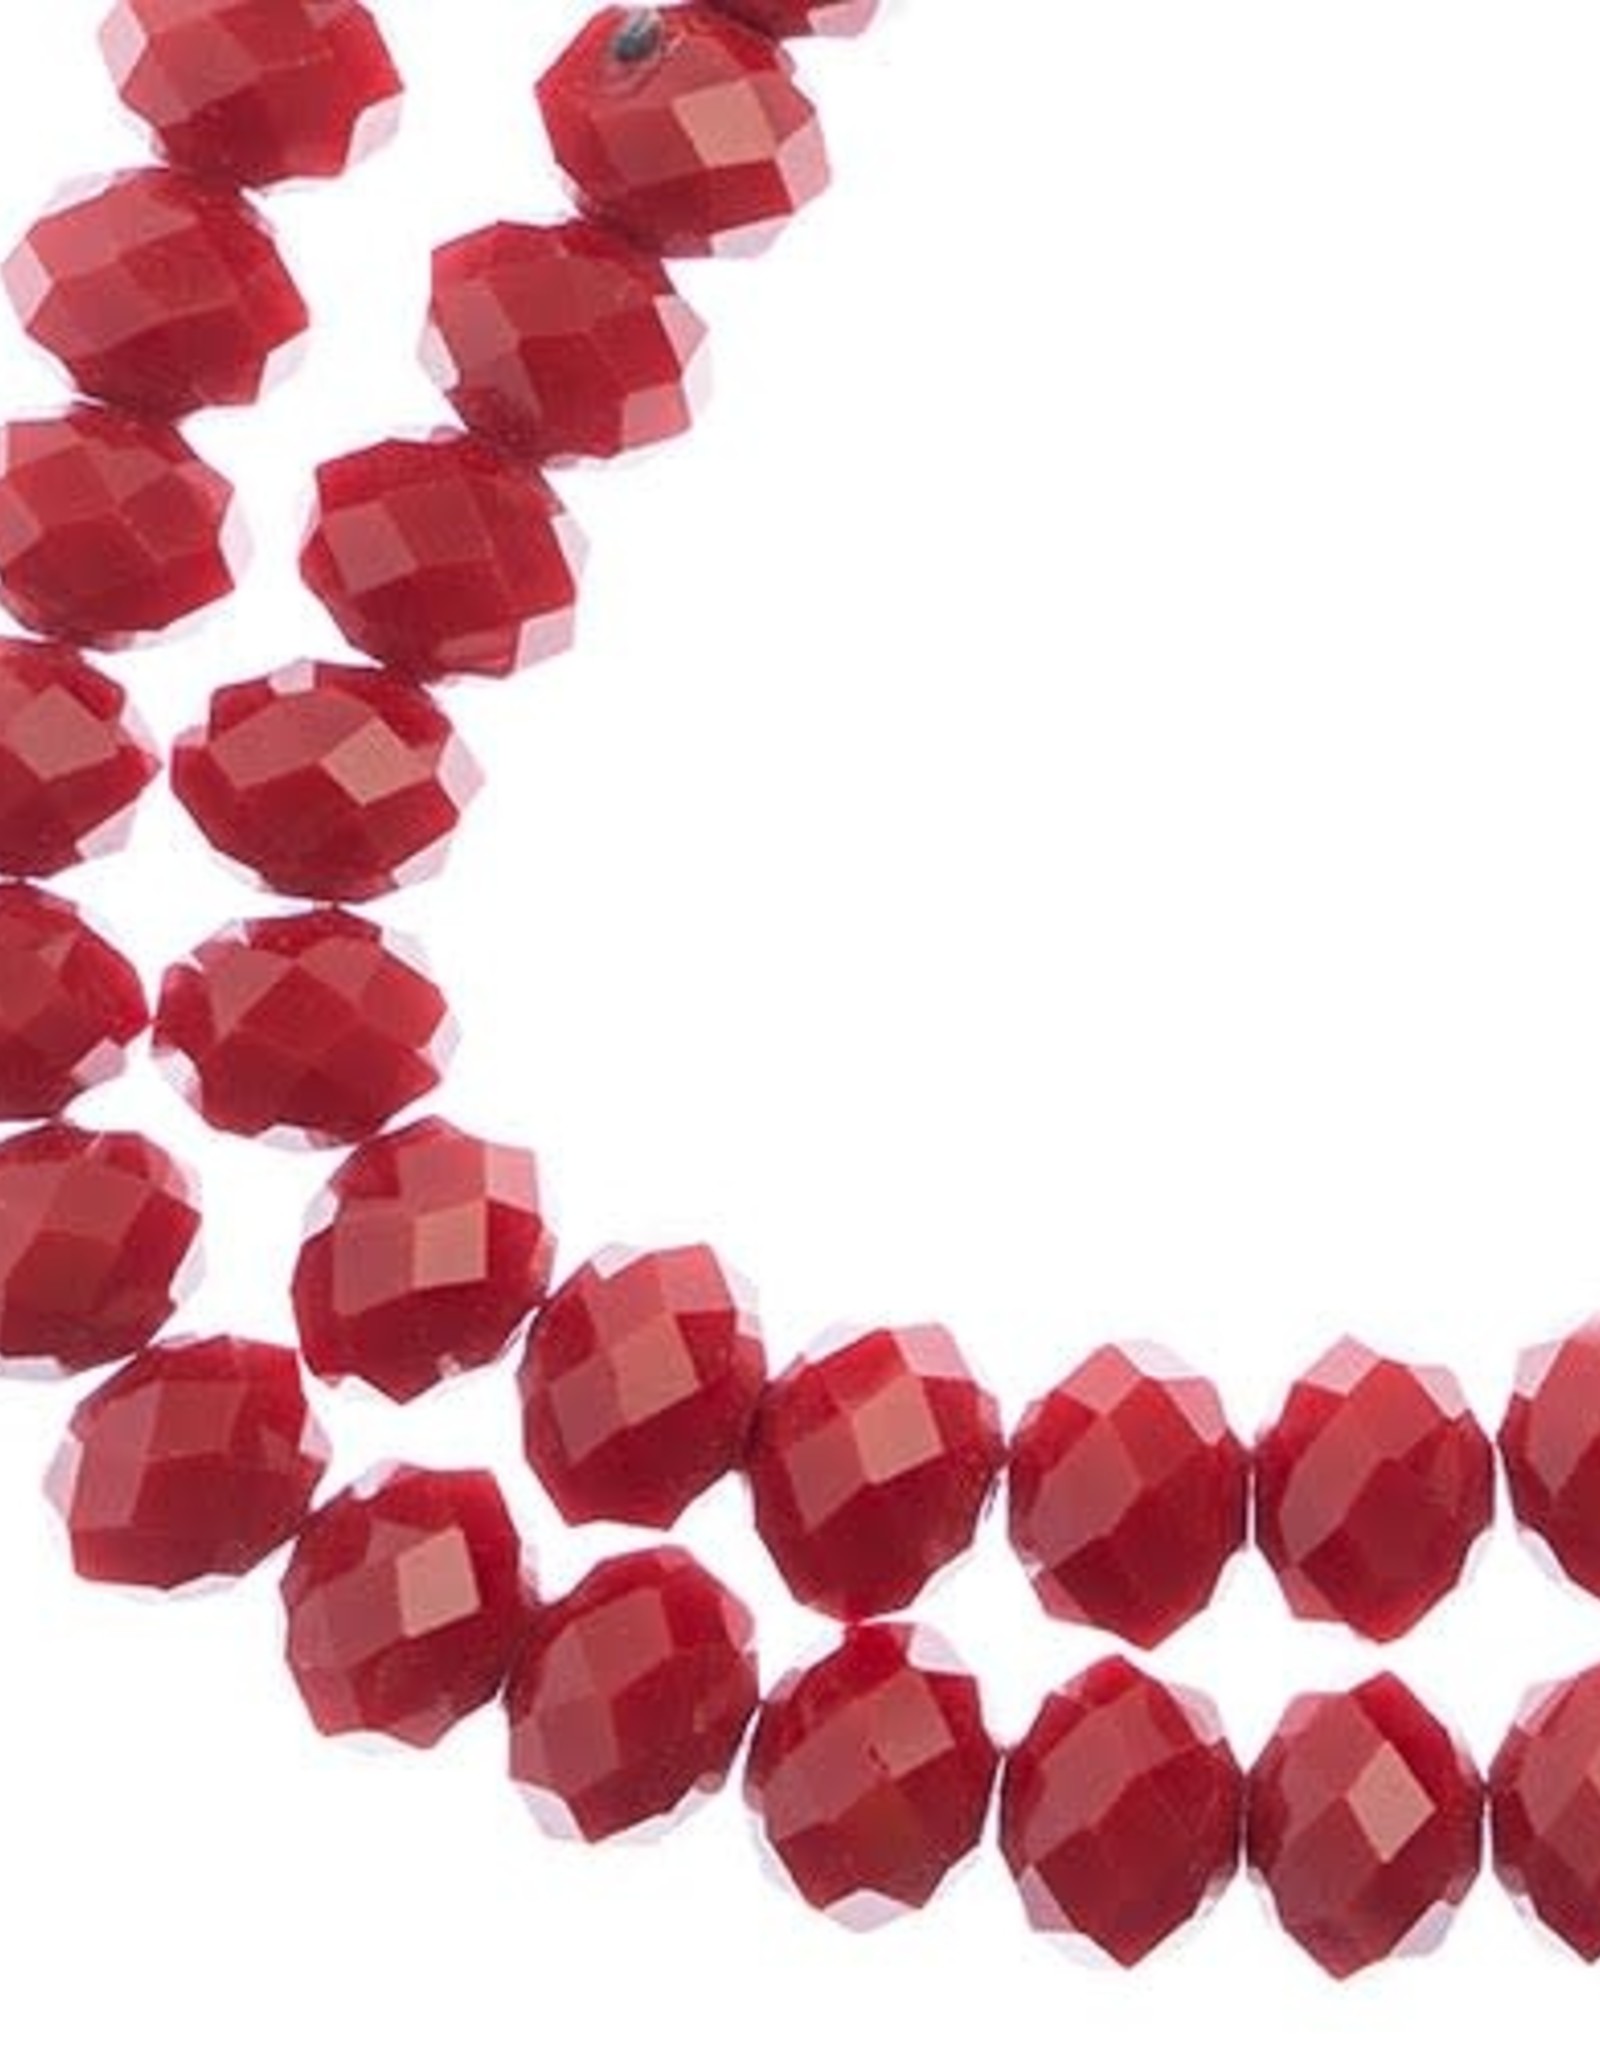 Crystal Lane Rondelle Crystal Lane Rondelle 2Strand 7in 8x10mm- Opaque Red